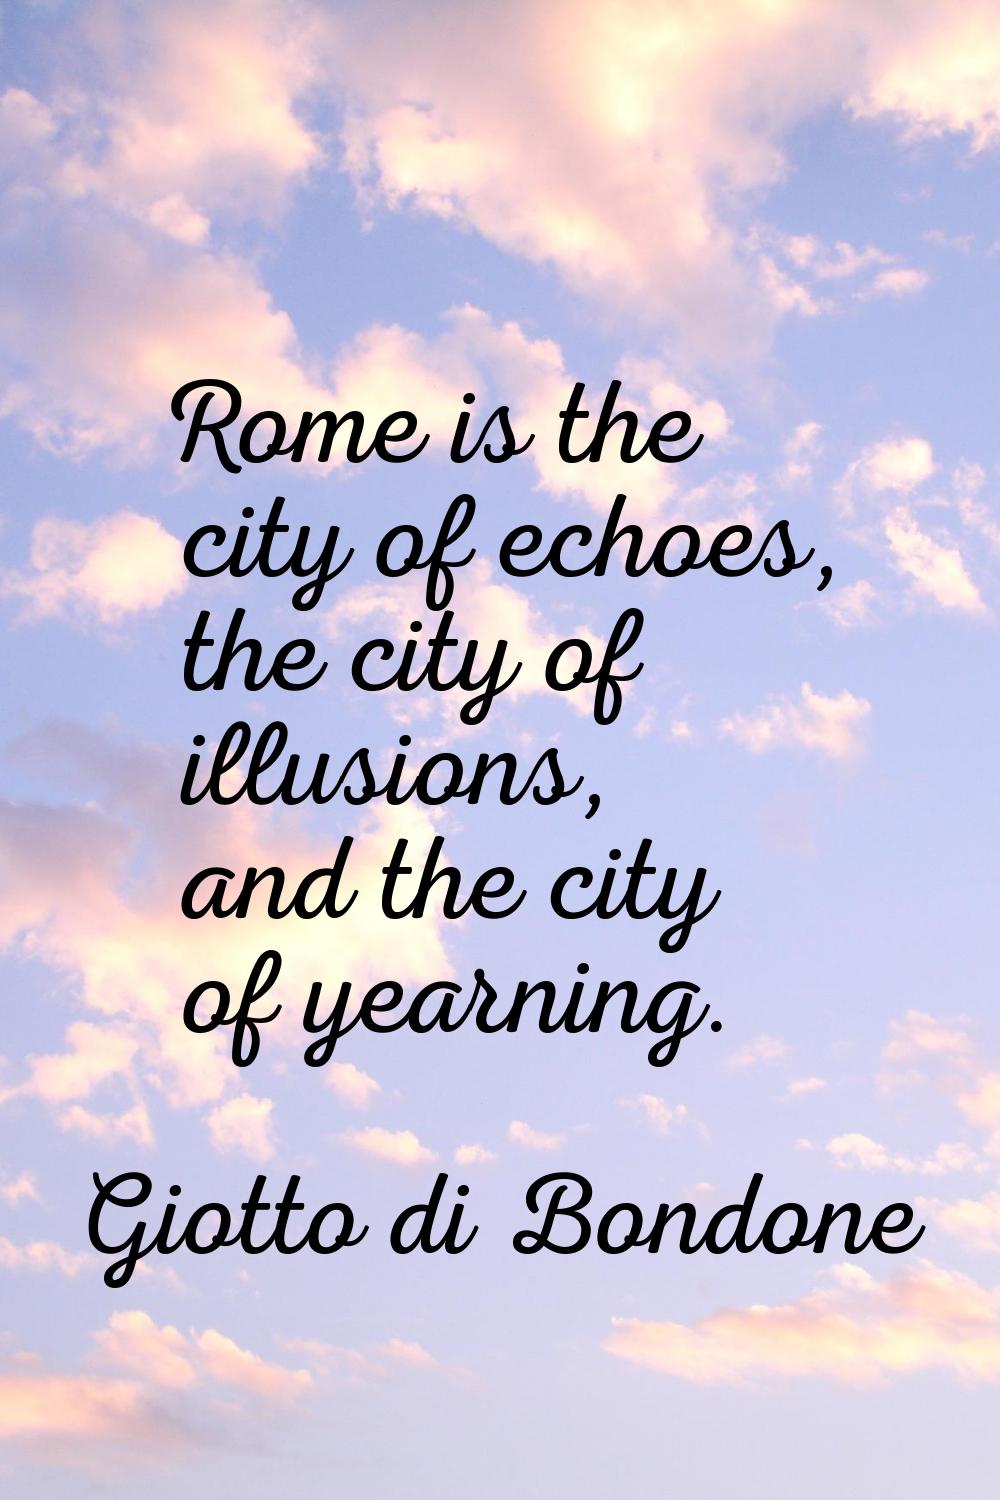 Rome is the city of echoes, the city of illusions, and the city of yearning.